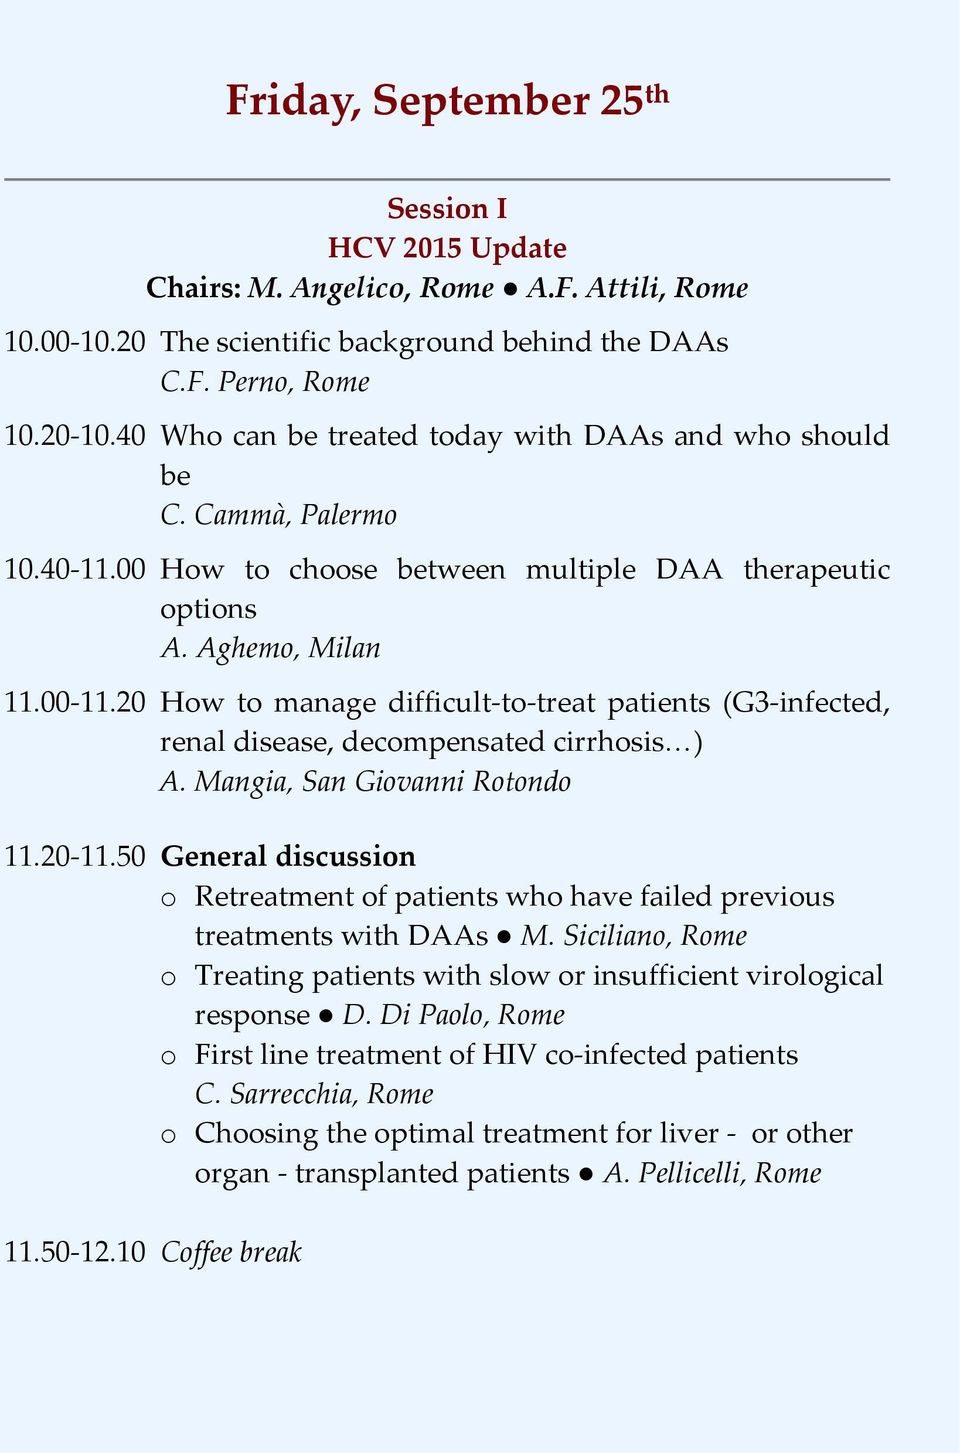 20 How to manage difficult to treat patients (G3 infected, renal disease, decompensated cirrhosis ) A. Mangia, San Giovanni Rotondo 11.20 11.